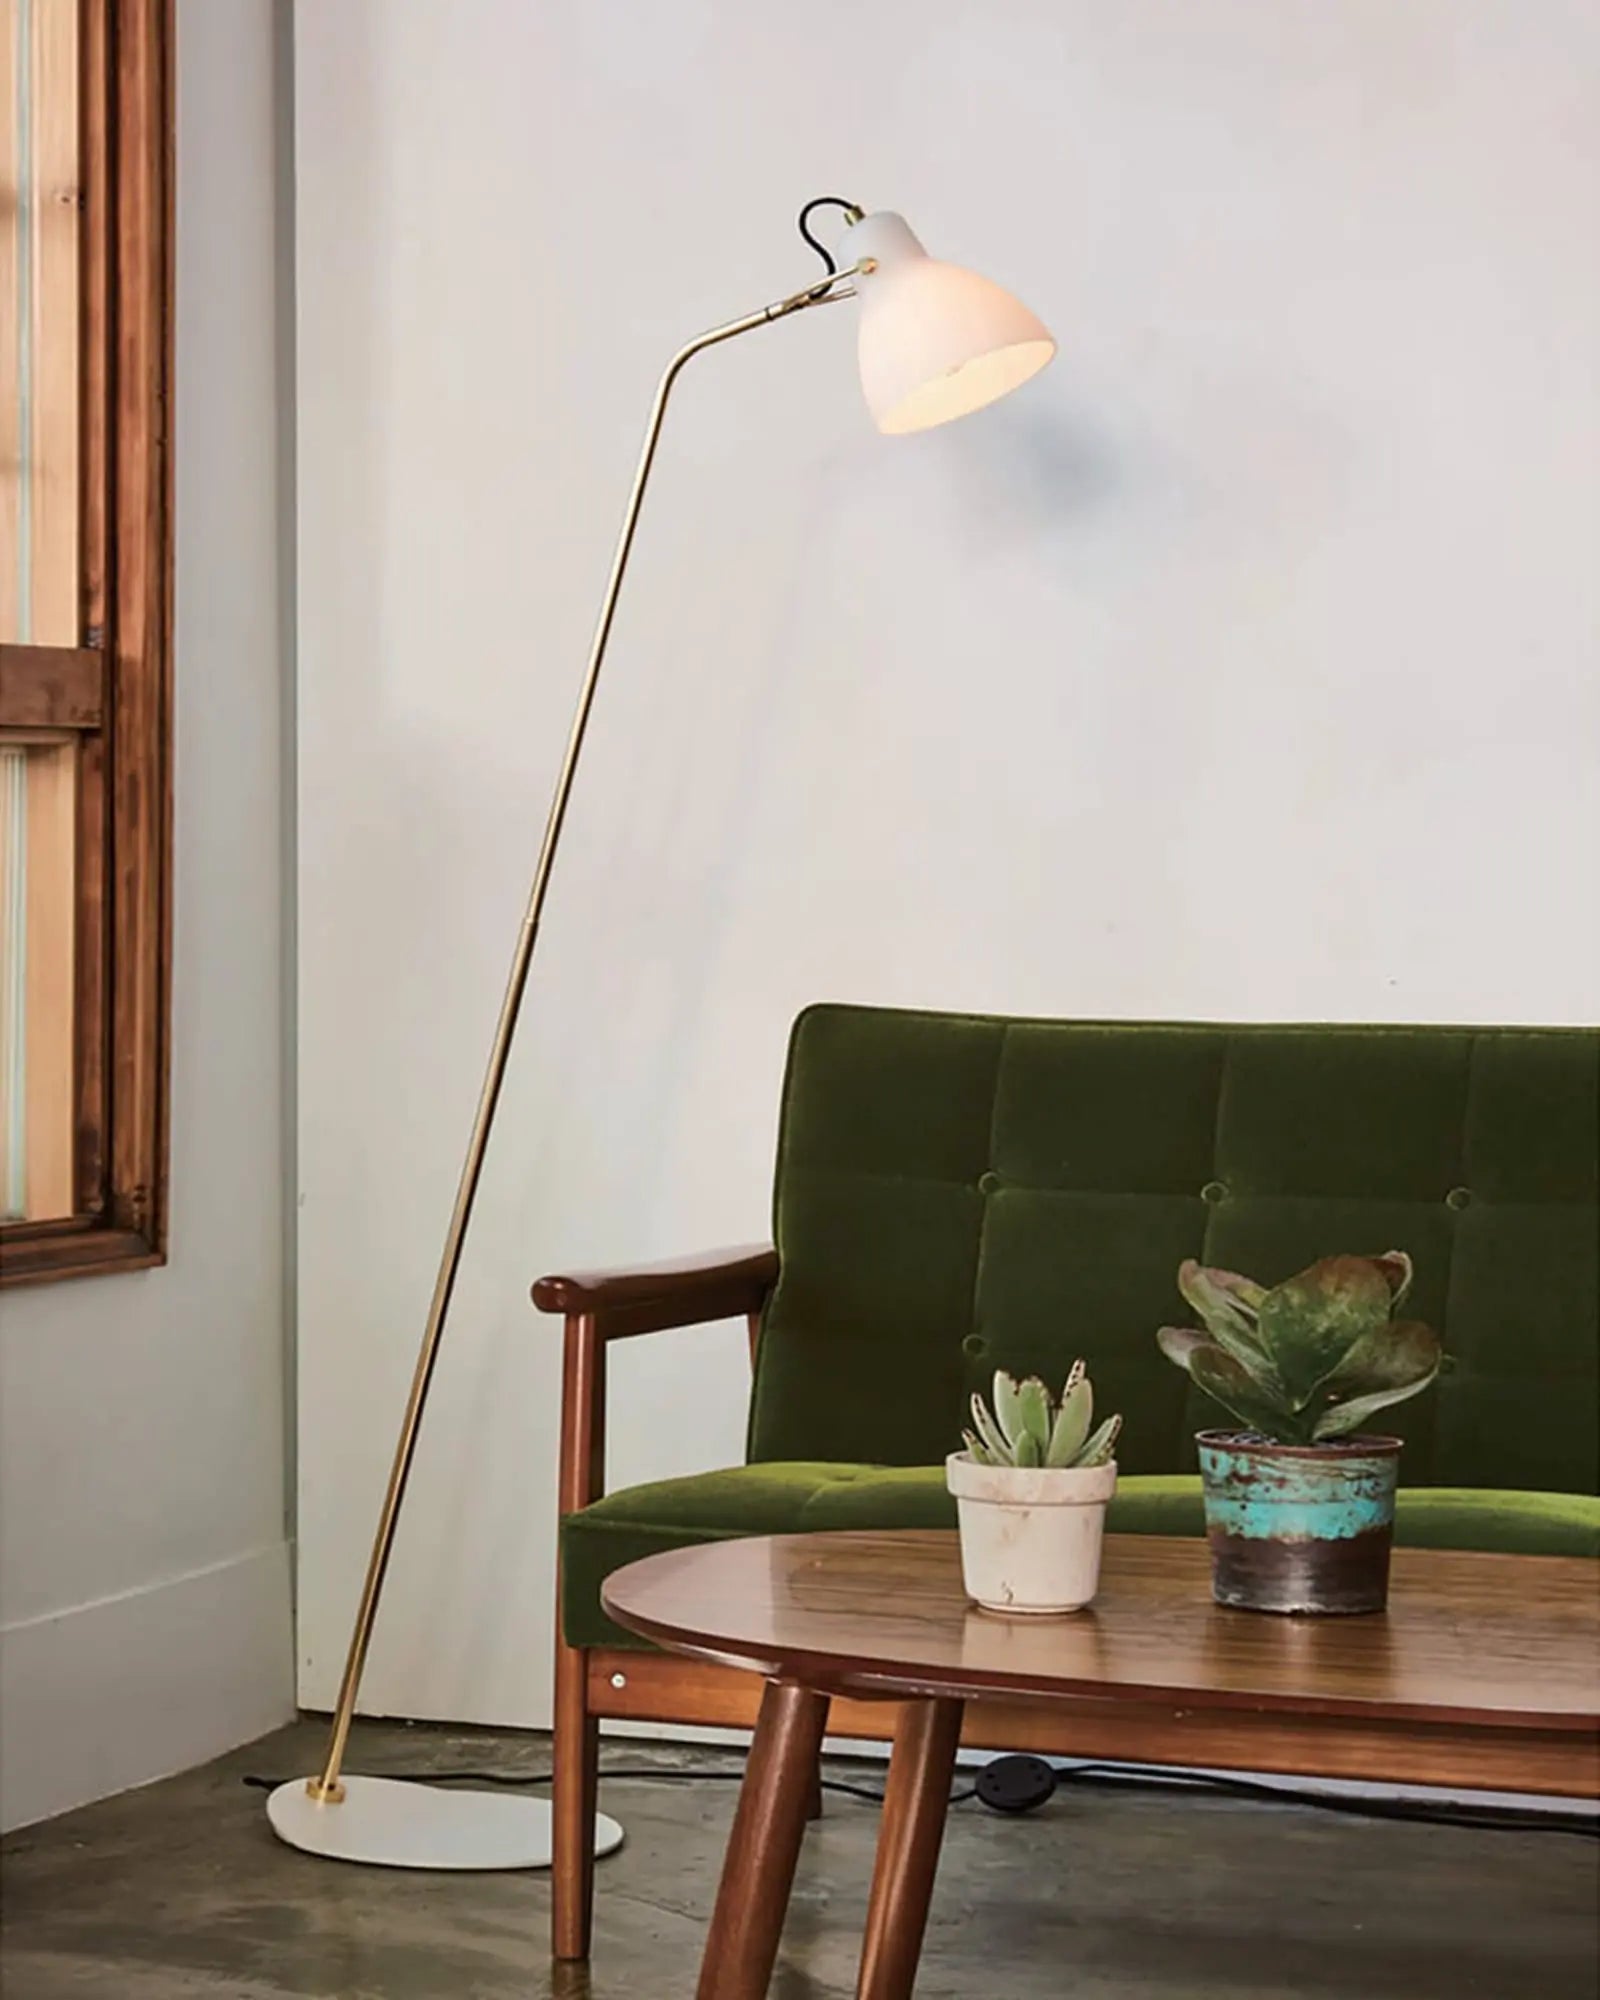 Laito floor lamp above a sofa